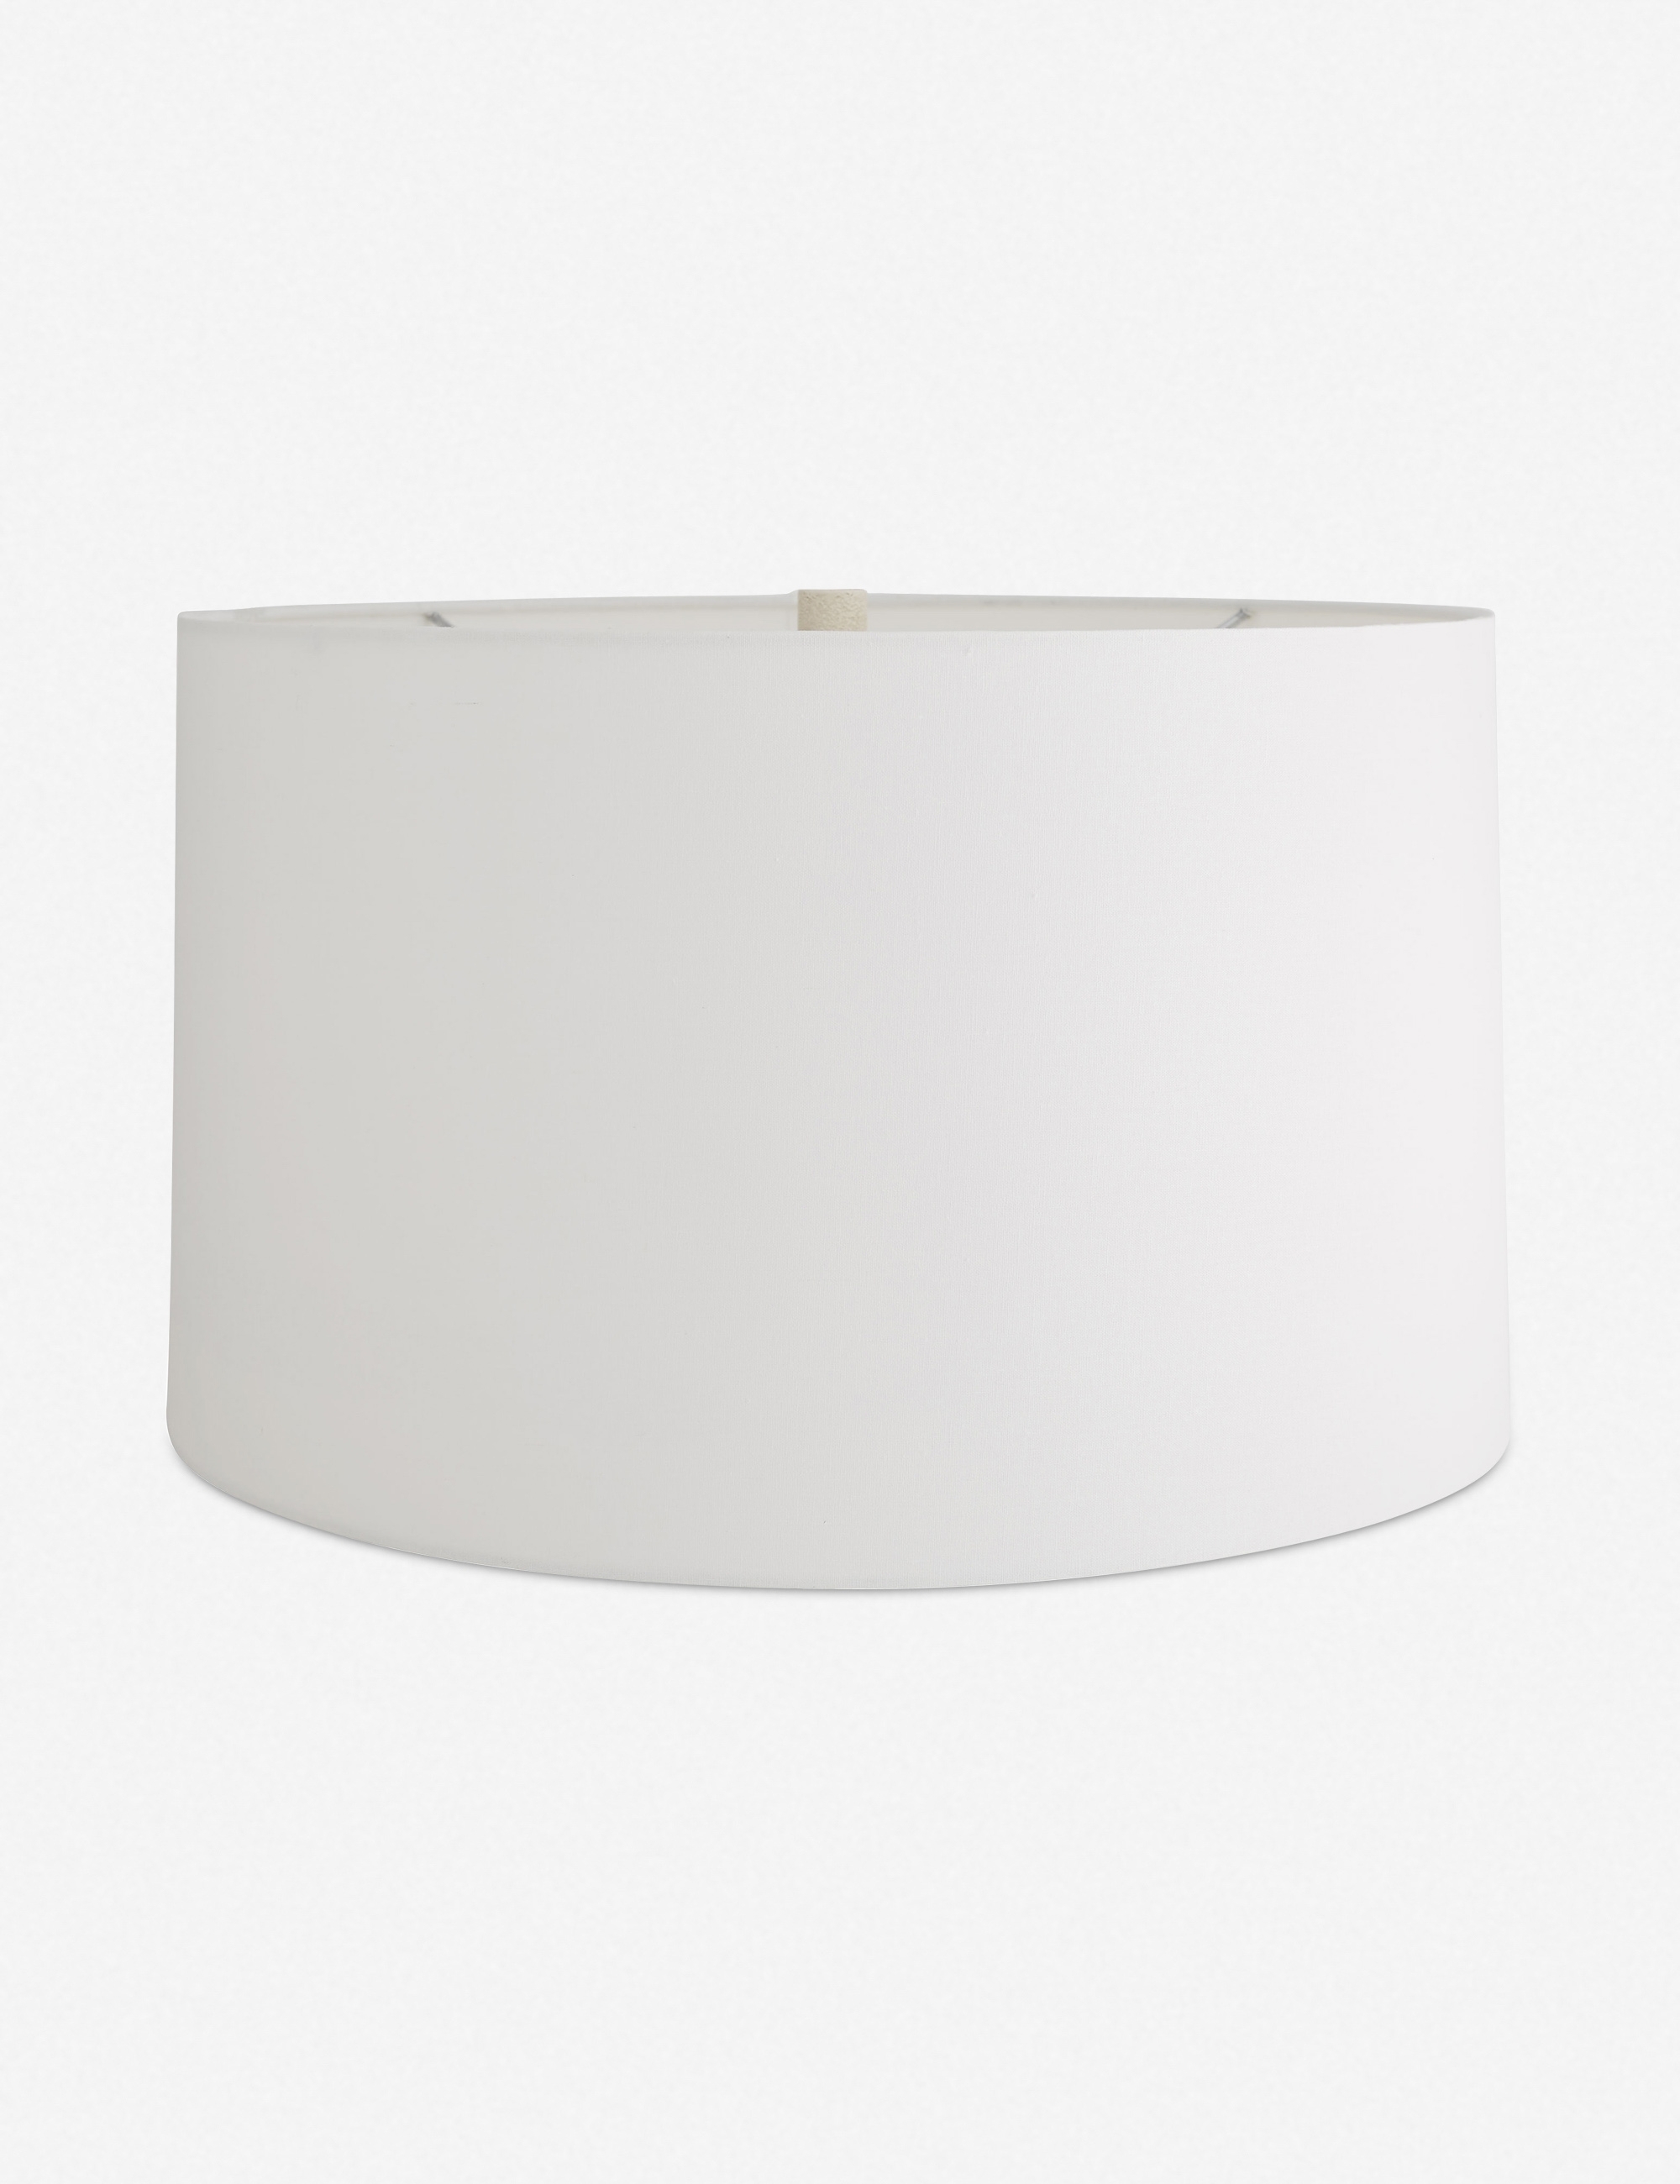 Tangier Table Lamp by Beth Webb for Arteriors - Image 4